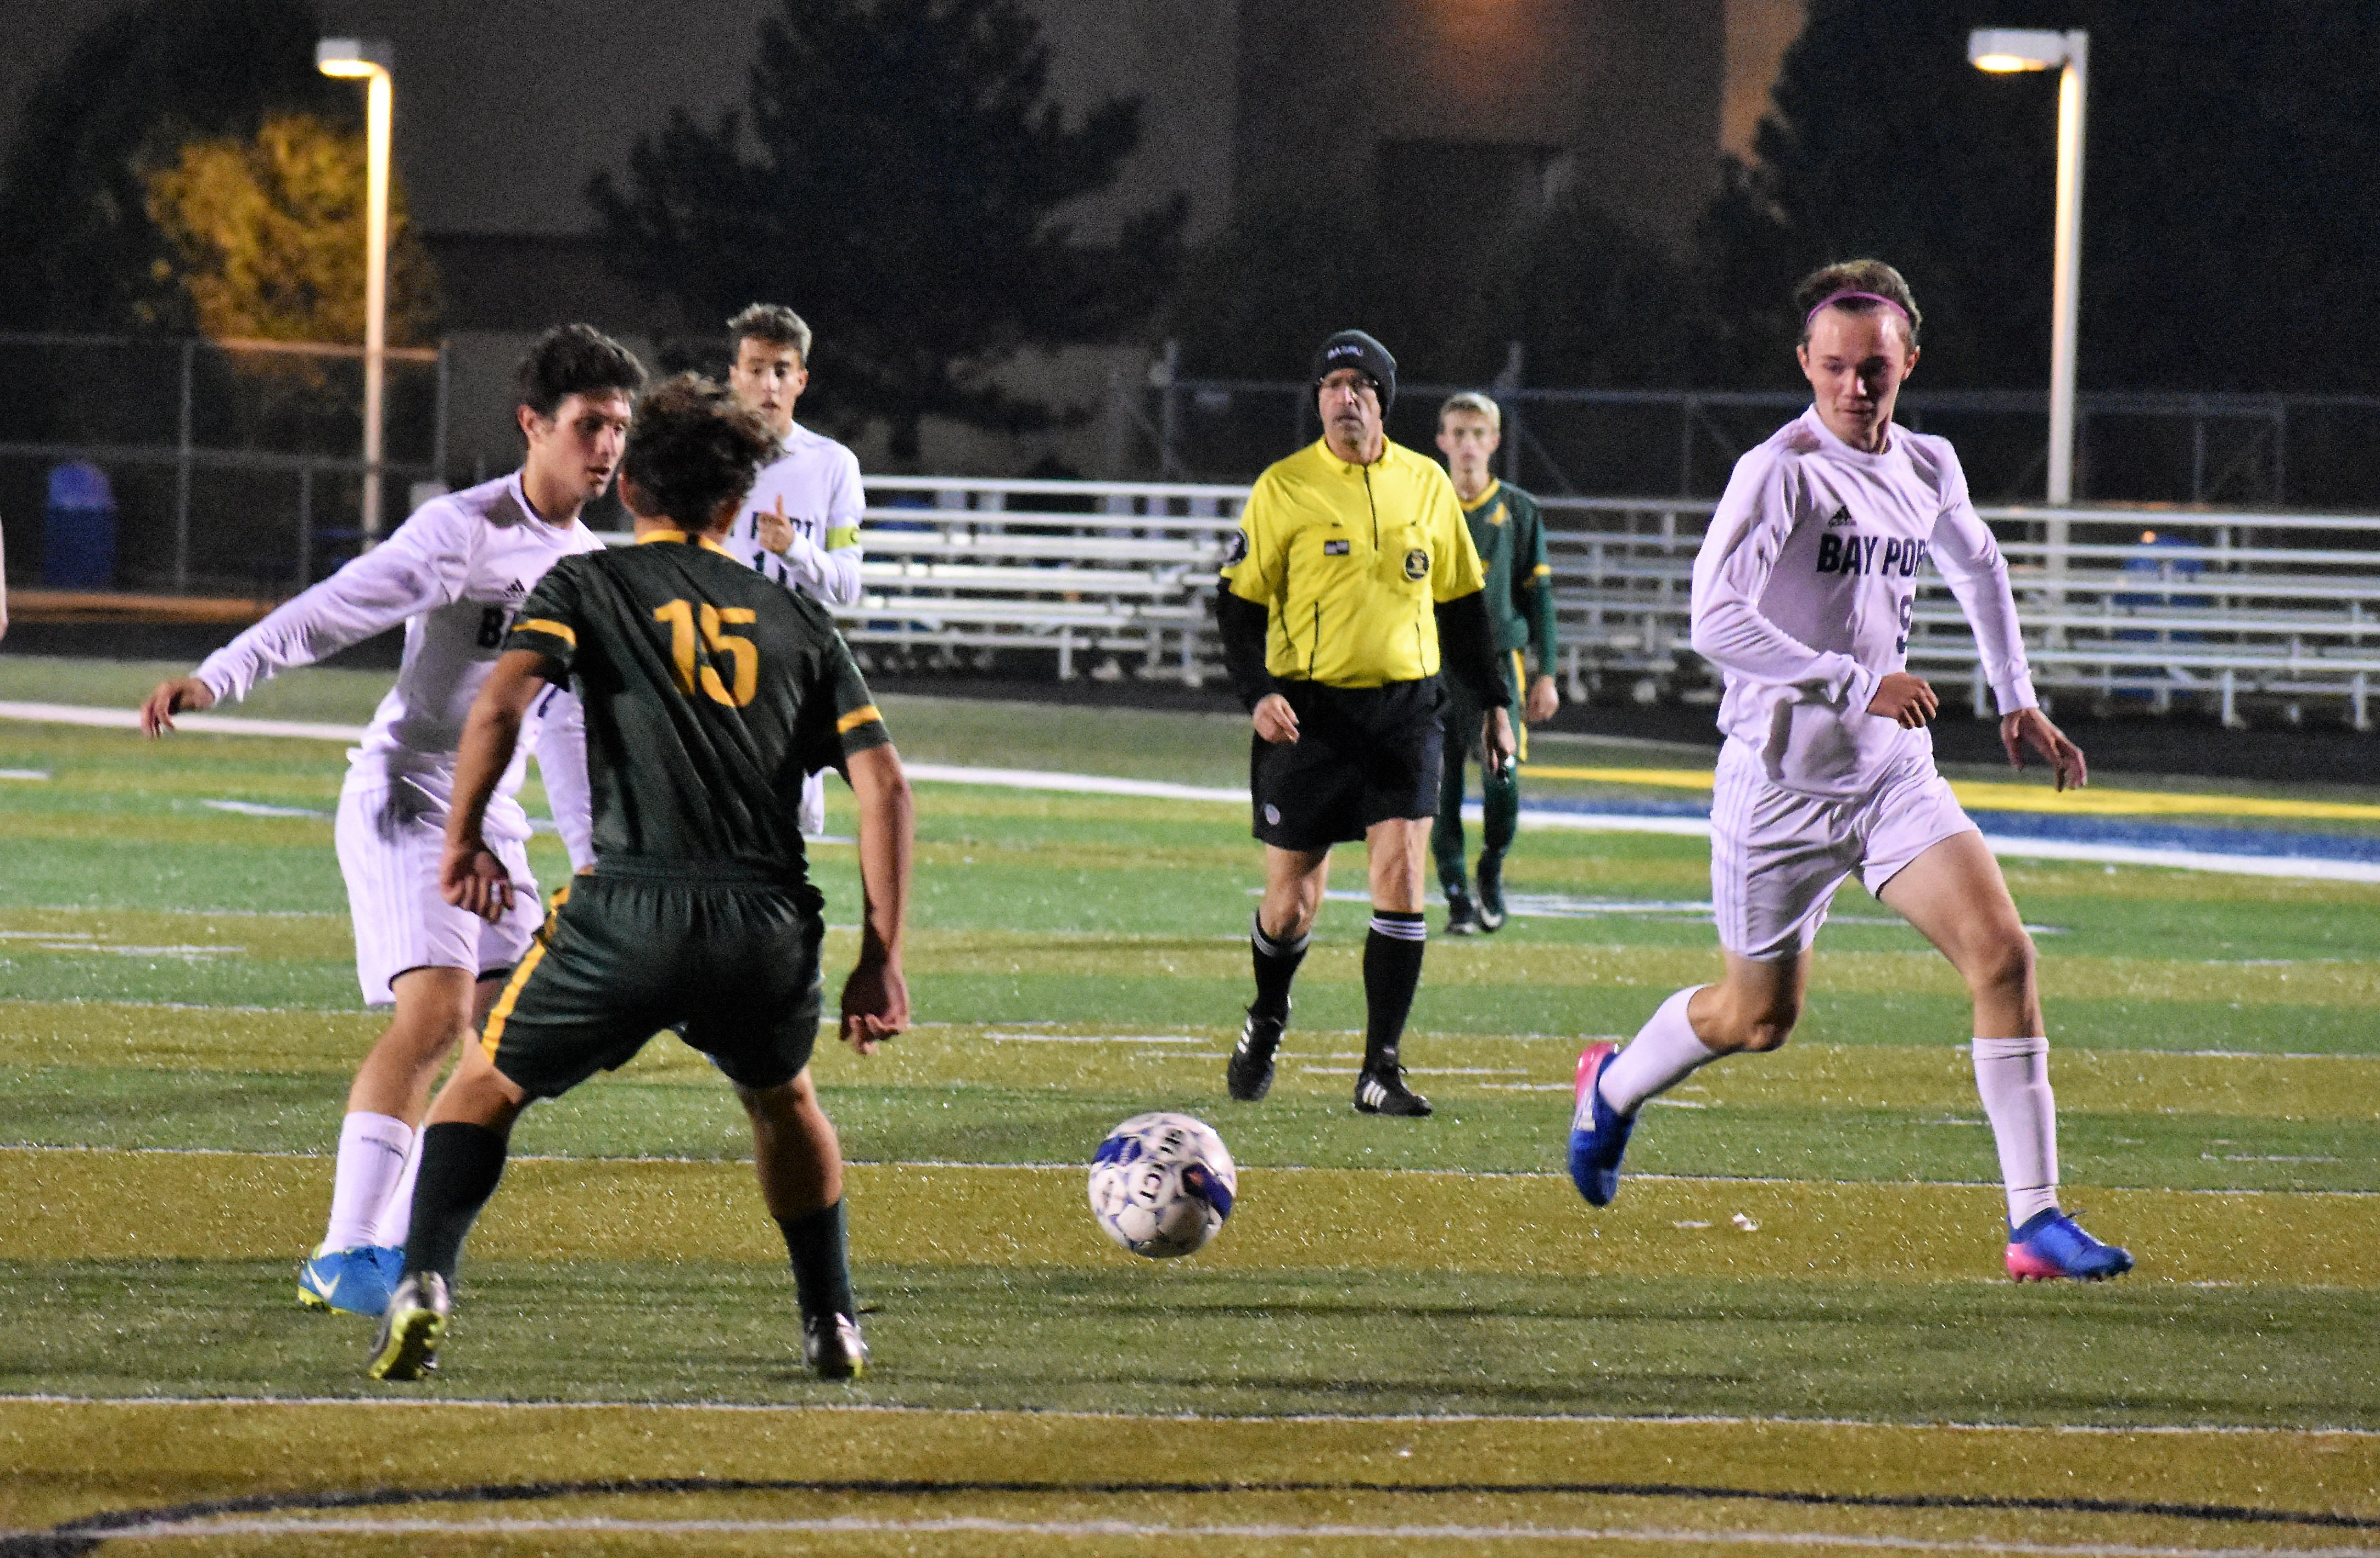 Pirates Rout Jaguars in Boys Soccer